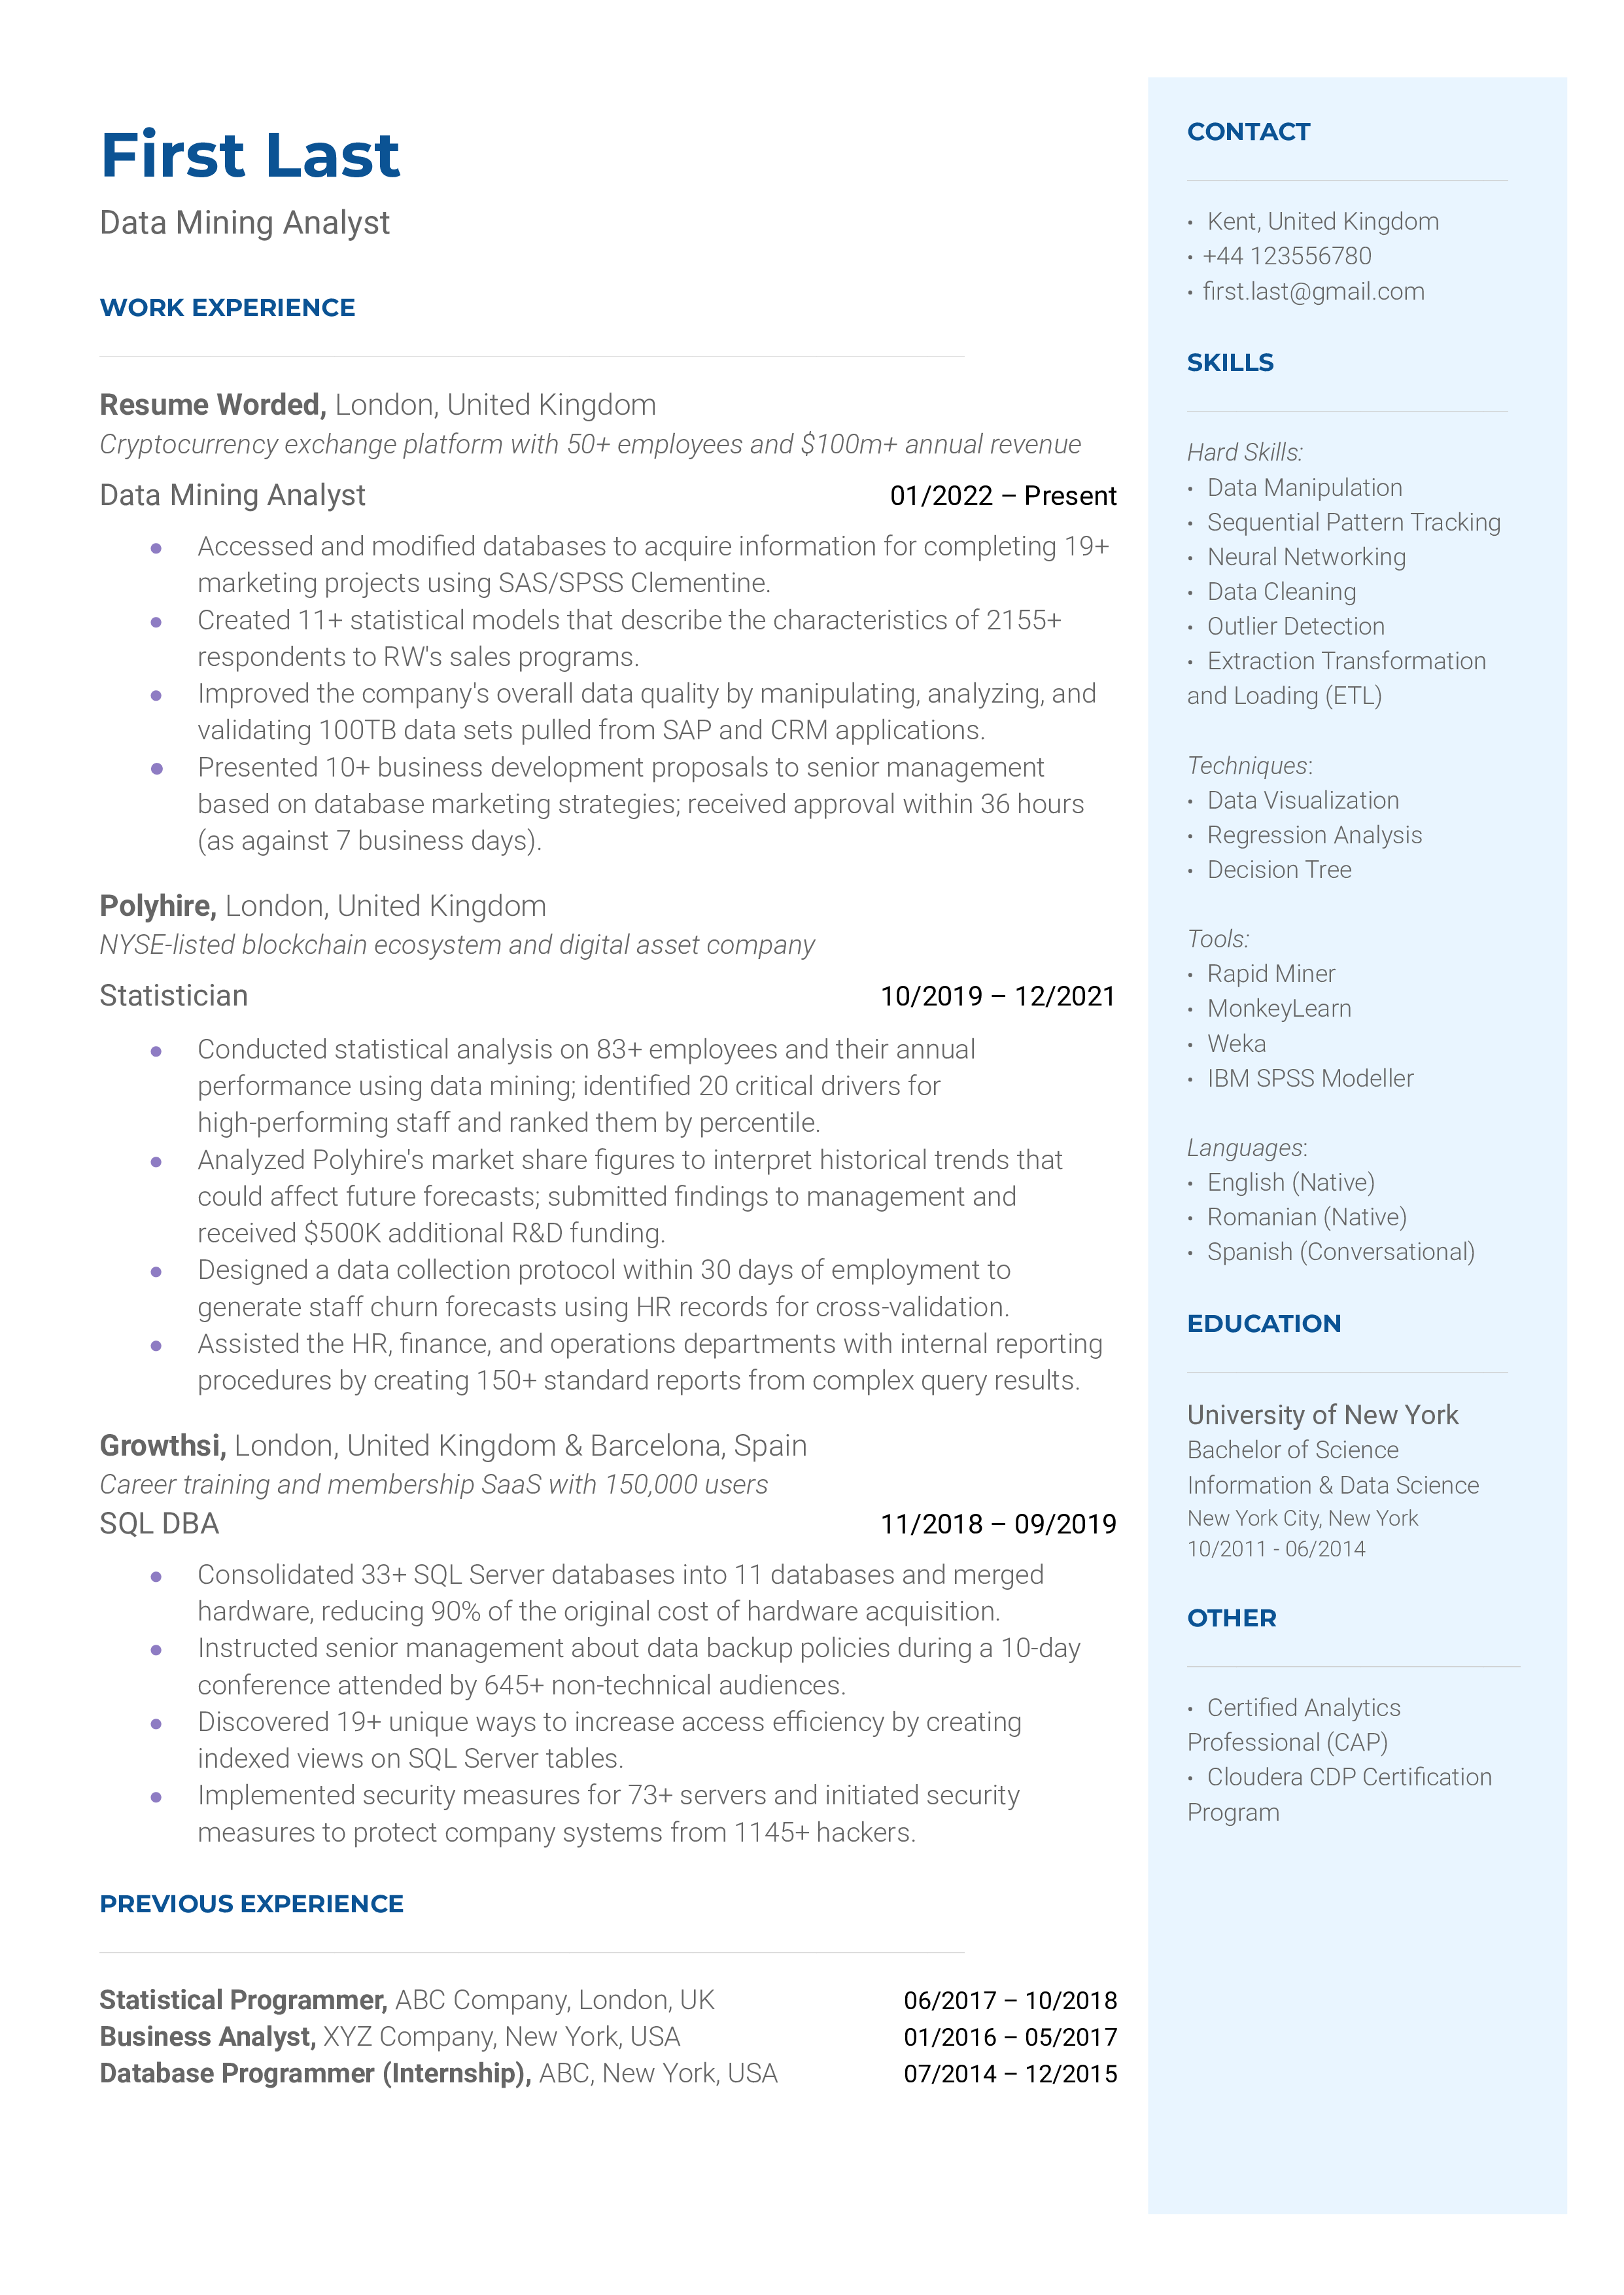 A CV screenshot highlighting technical skills and experiences for a Data Mining Analyst role.